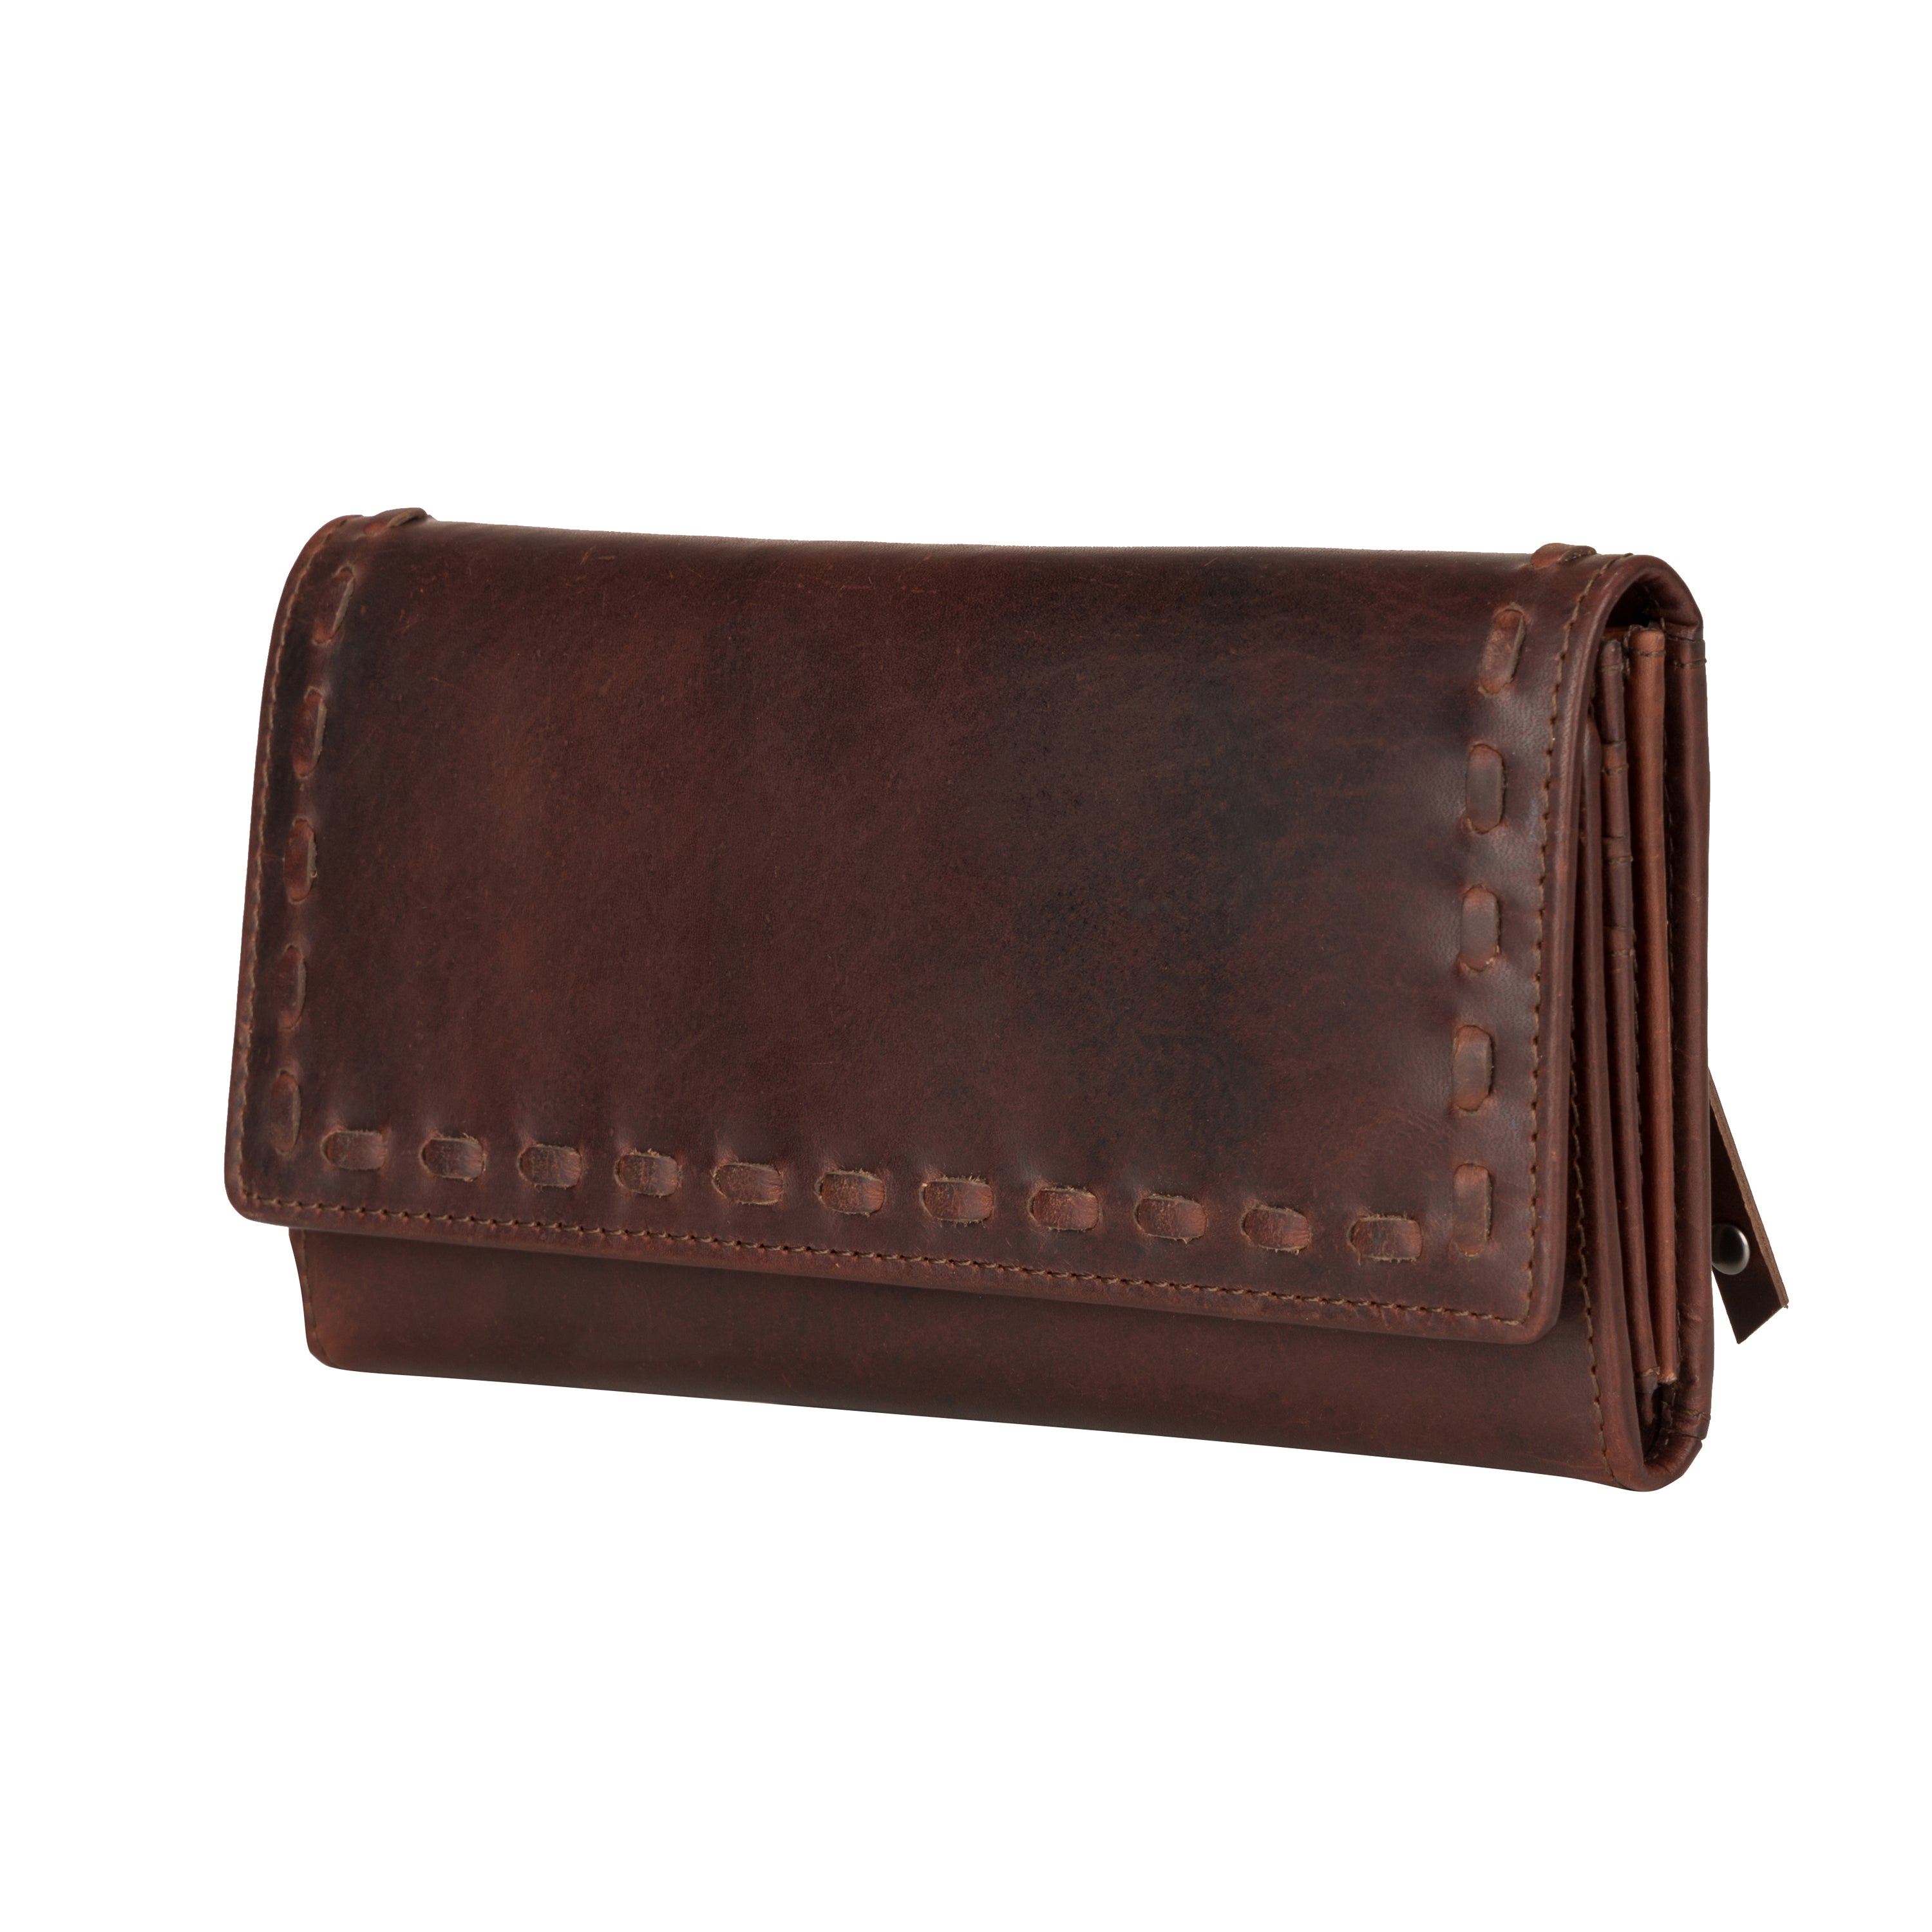 Hope RFID Leather Laced Wallet - Matching Wallet for Conceal Carry Purse - brown leather clutch wallet - leather clutch wallet purse bag - classic leather clutch wallet - gray leather clutch wallet small wallets for women - mini wallet - ladies wallet purse - women wallet sale - best small wallets for women